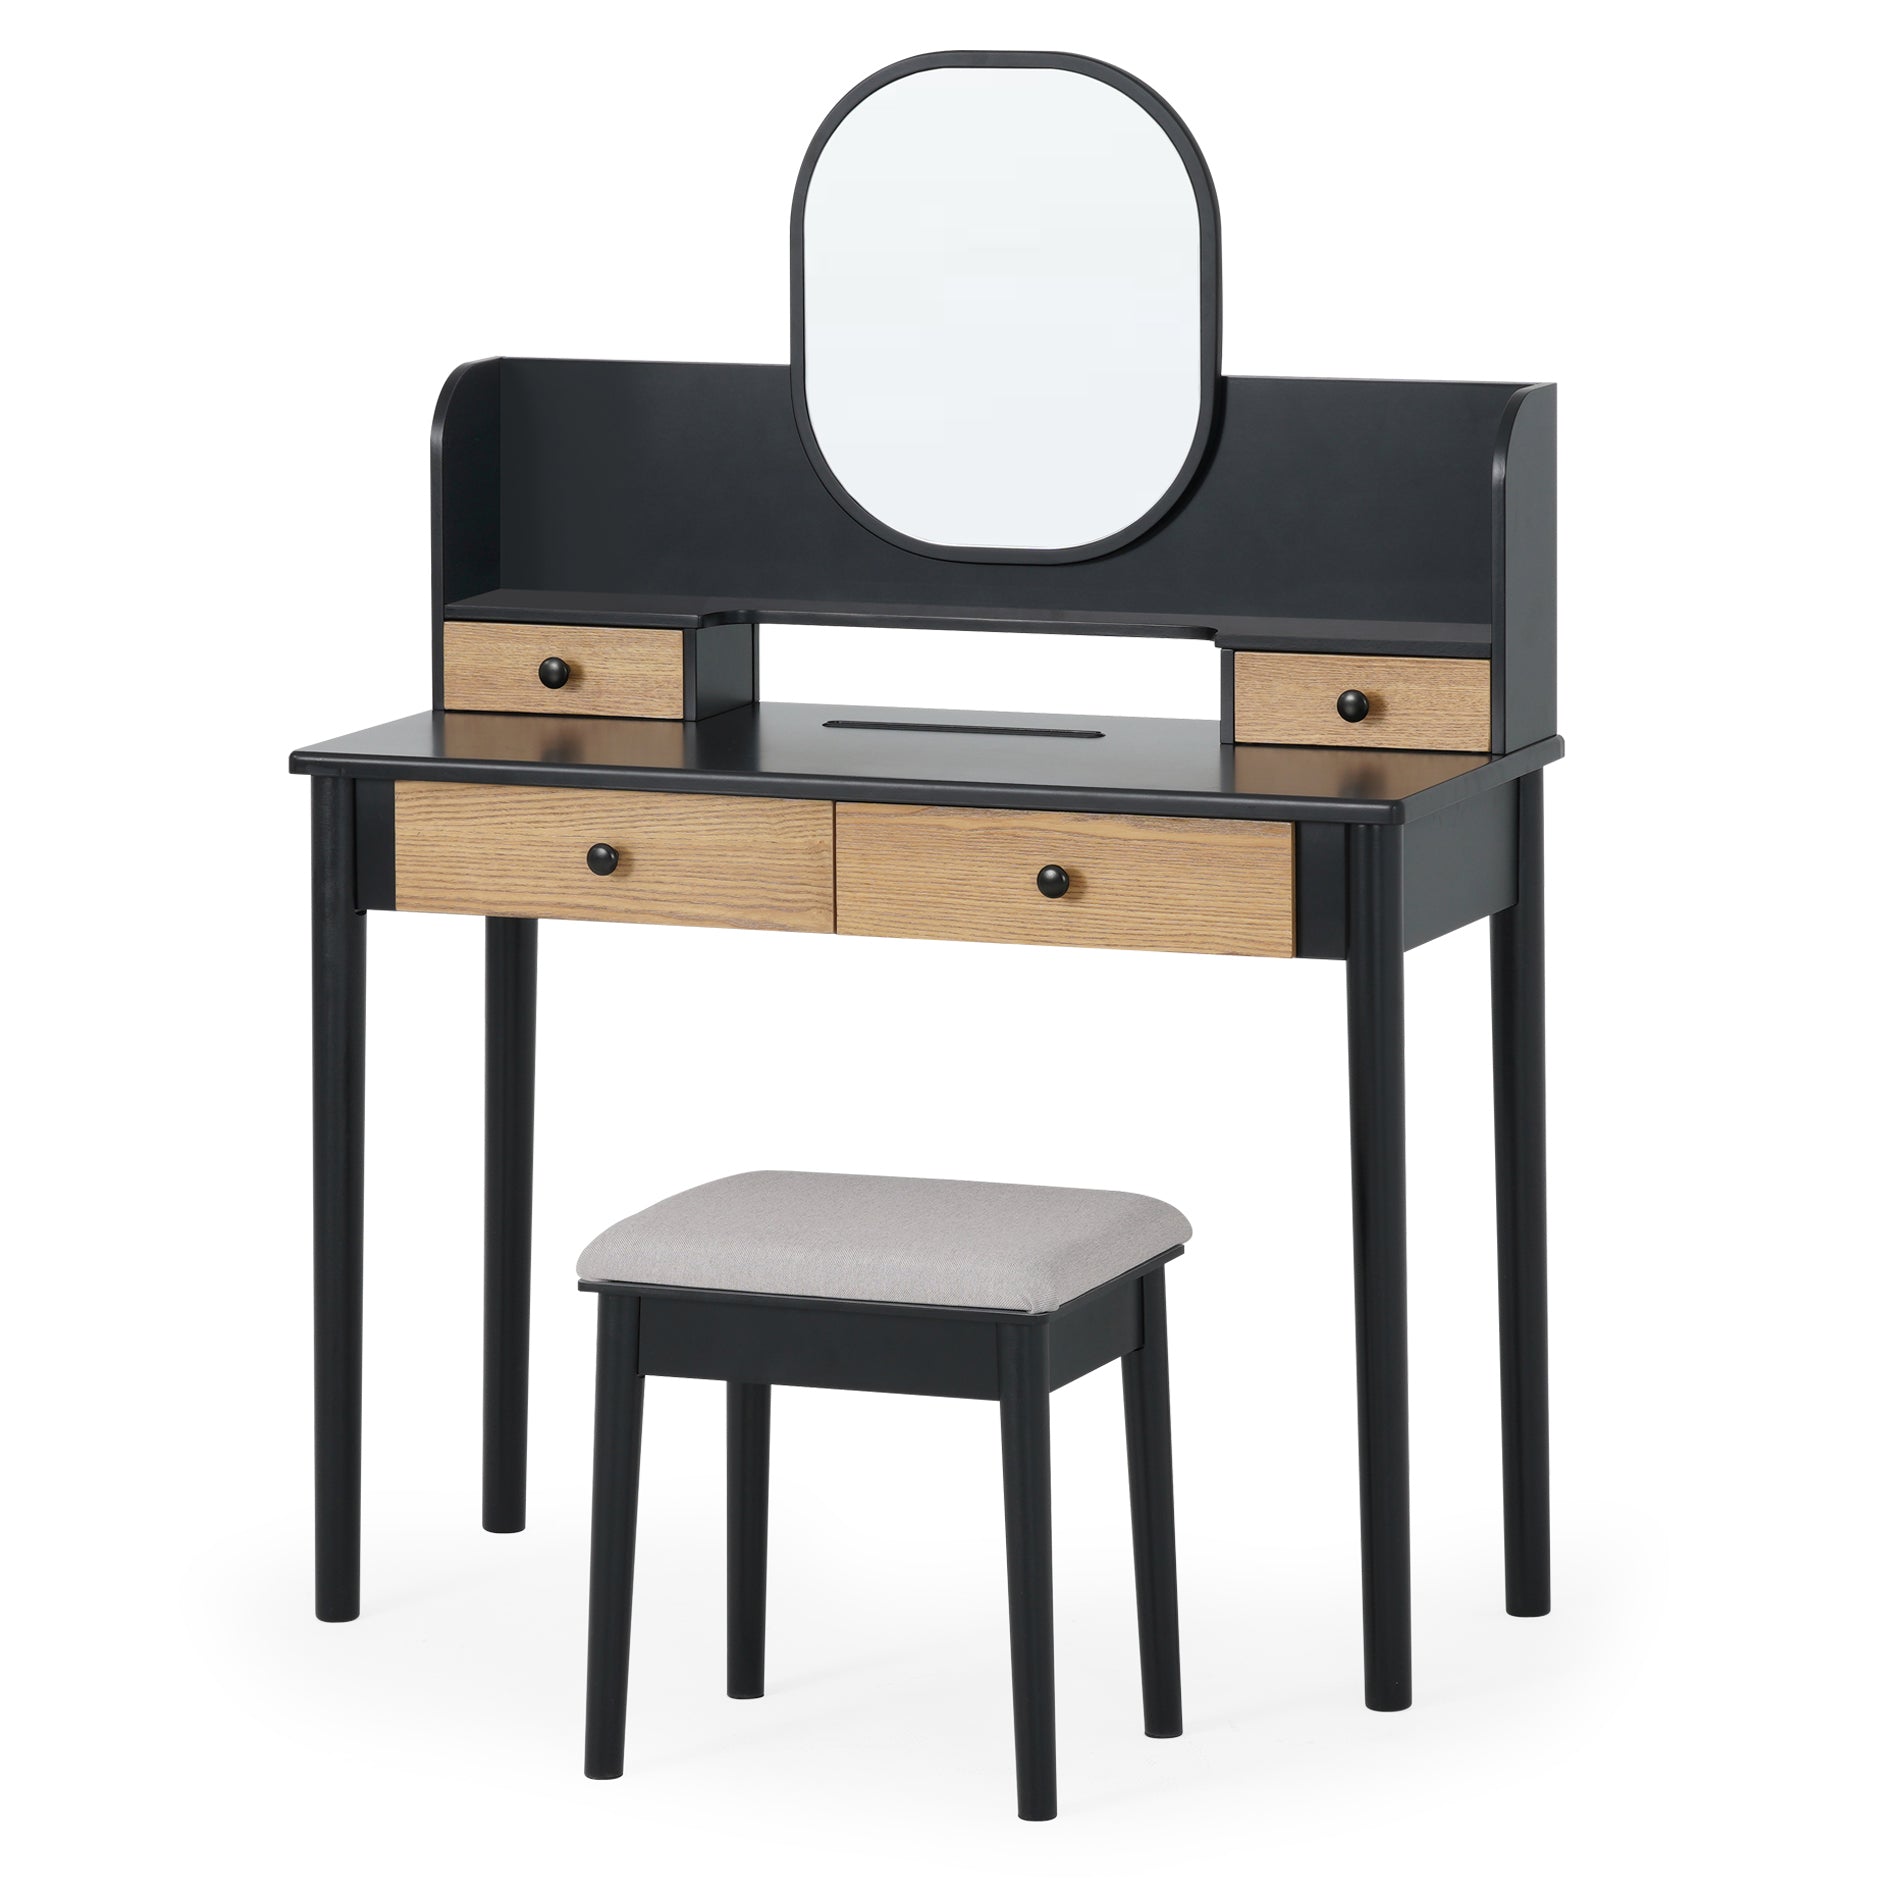 39" Makeup Vanity Table with Cushioned Stool Set Desktop Slot  for Women Girls